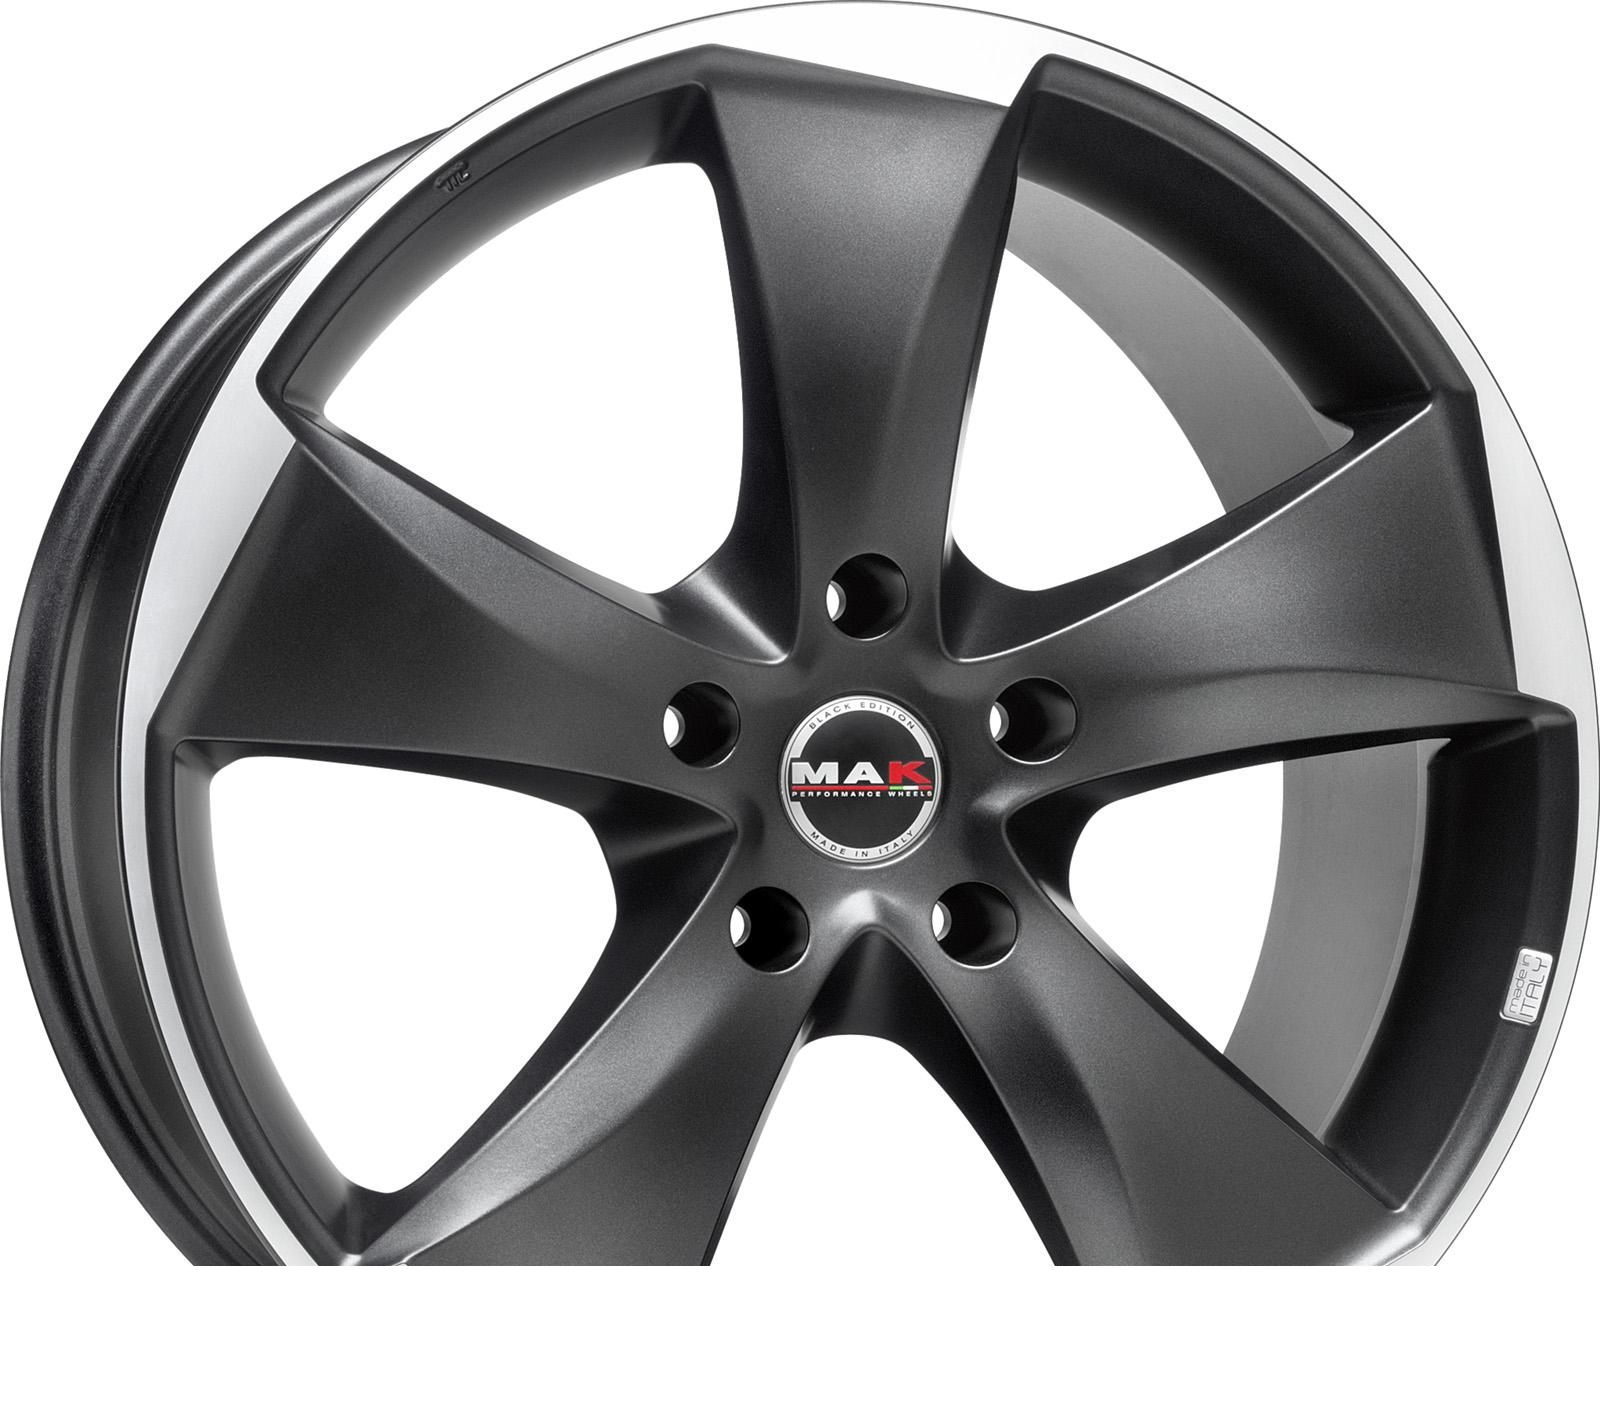 Wheel Mak Raptor 5 Hyper Silver 20x10.5inches/5x120mm - picture, photo, image